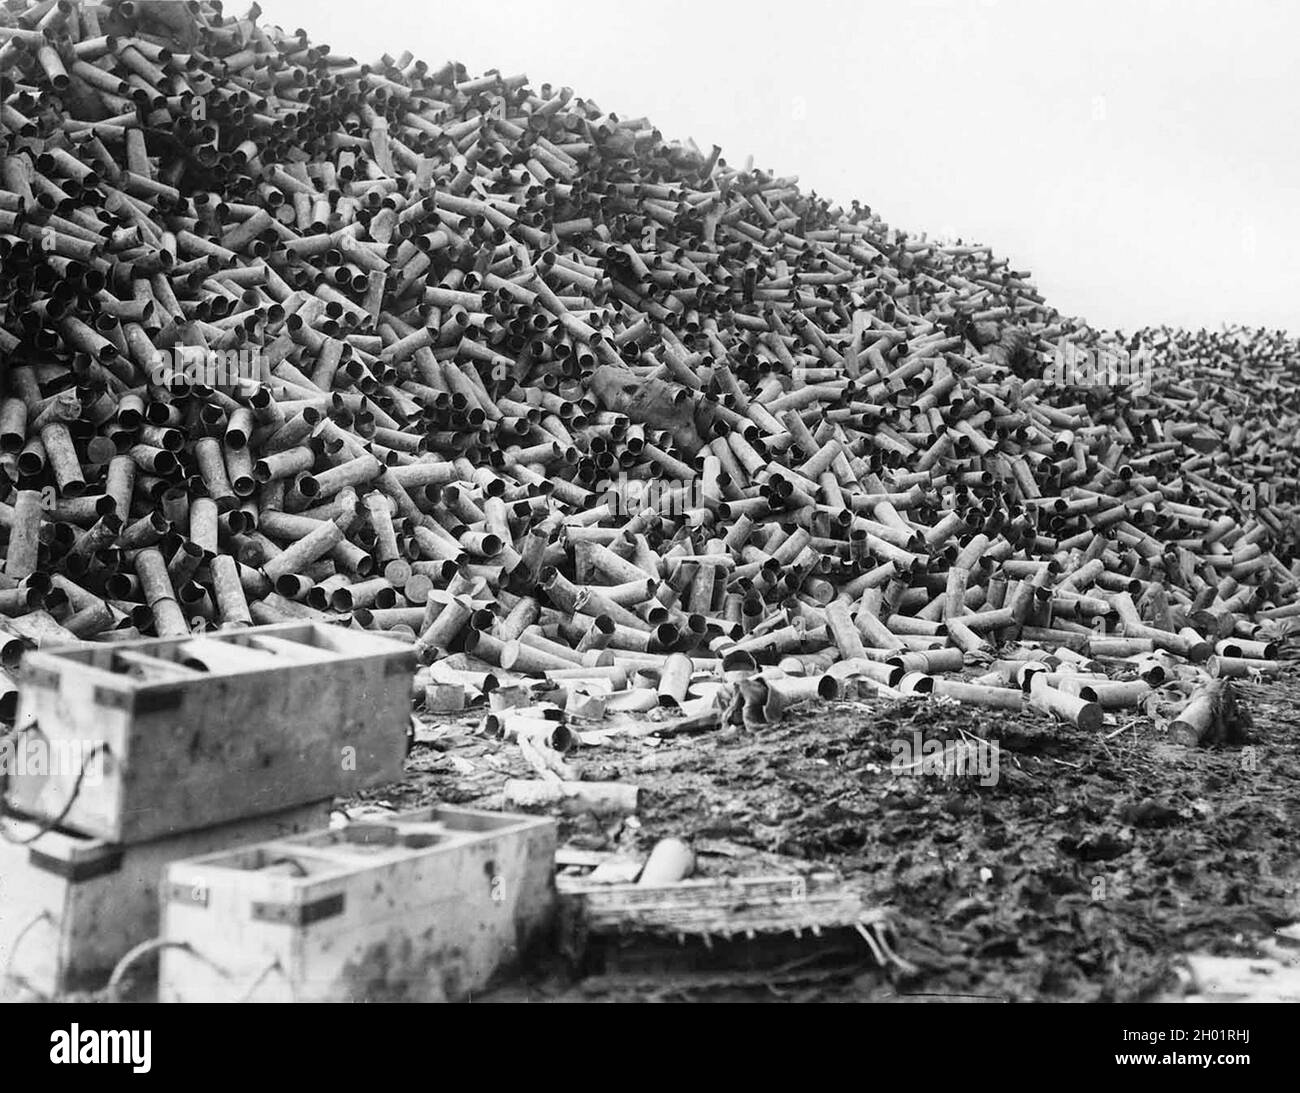 Mountains of shell cases by the road near the front lines. Millions of shells were fired during the mass bombardments before a major assault on the enemy trenches. Stock Photo